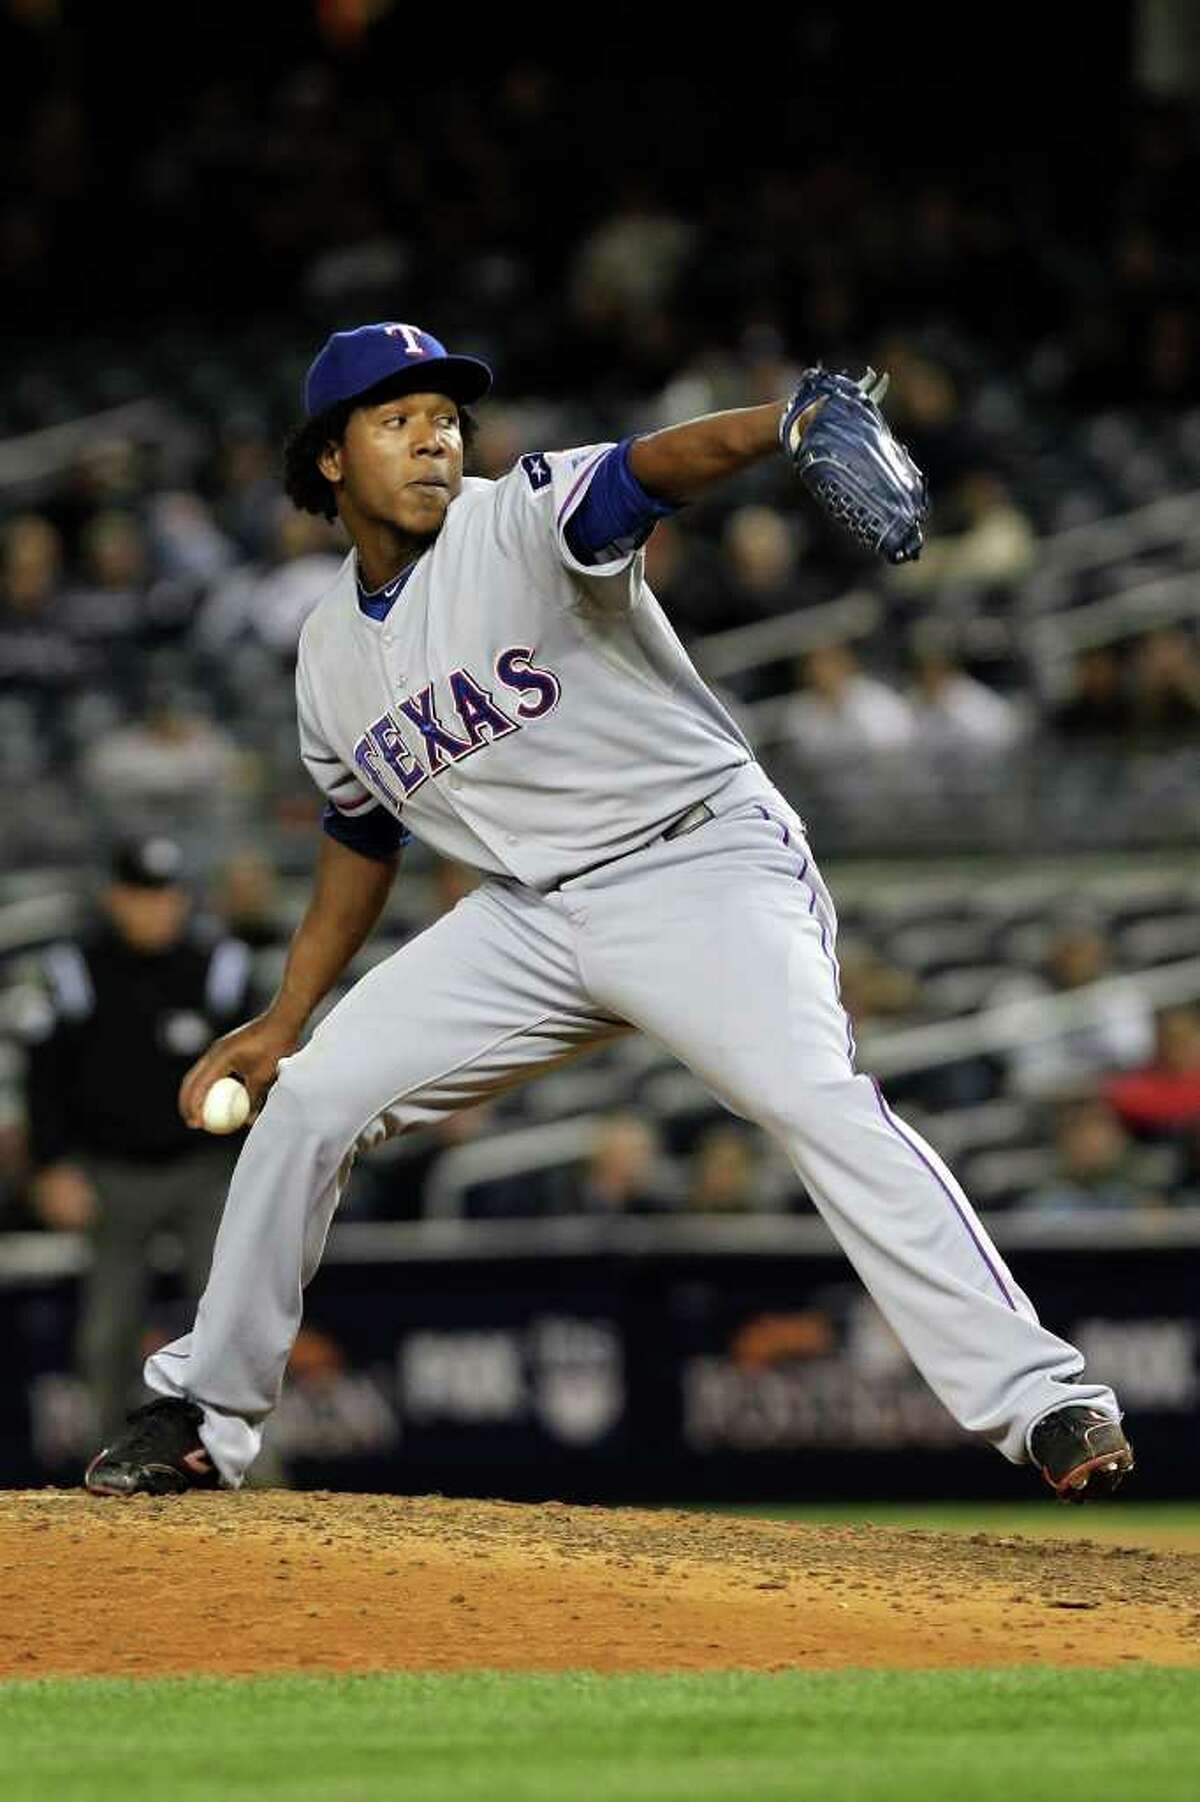 NEW YORK - OCTOBER 18: Neftali Feliz #30 ofthe Texas Rangers pitches against the New York Yankees in Game Three of the ALCS during the 2010 MLB Playoffs at Yankee Stadium on October 18, 2010 in New York, New York. The Rangers won 8-0. (Photo by Nick Laham/Getty Images) *** Local Caption *** Neftali Feliz